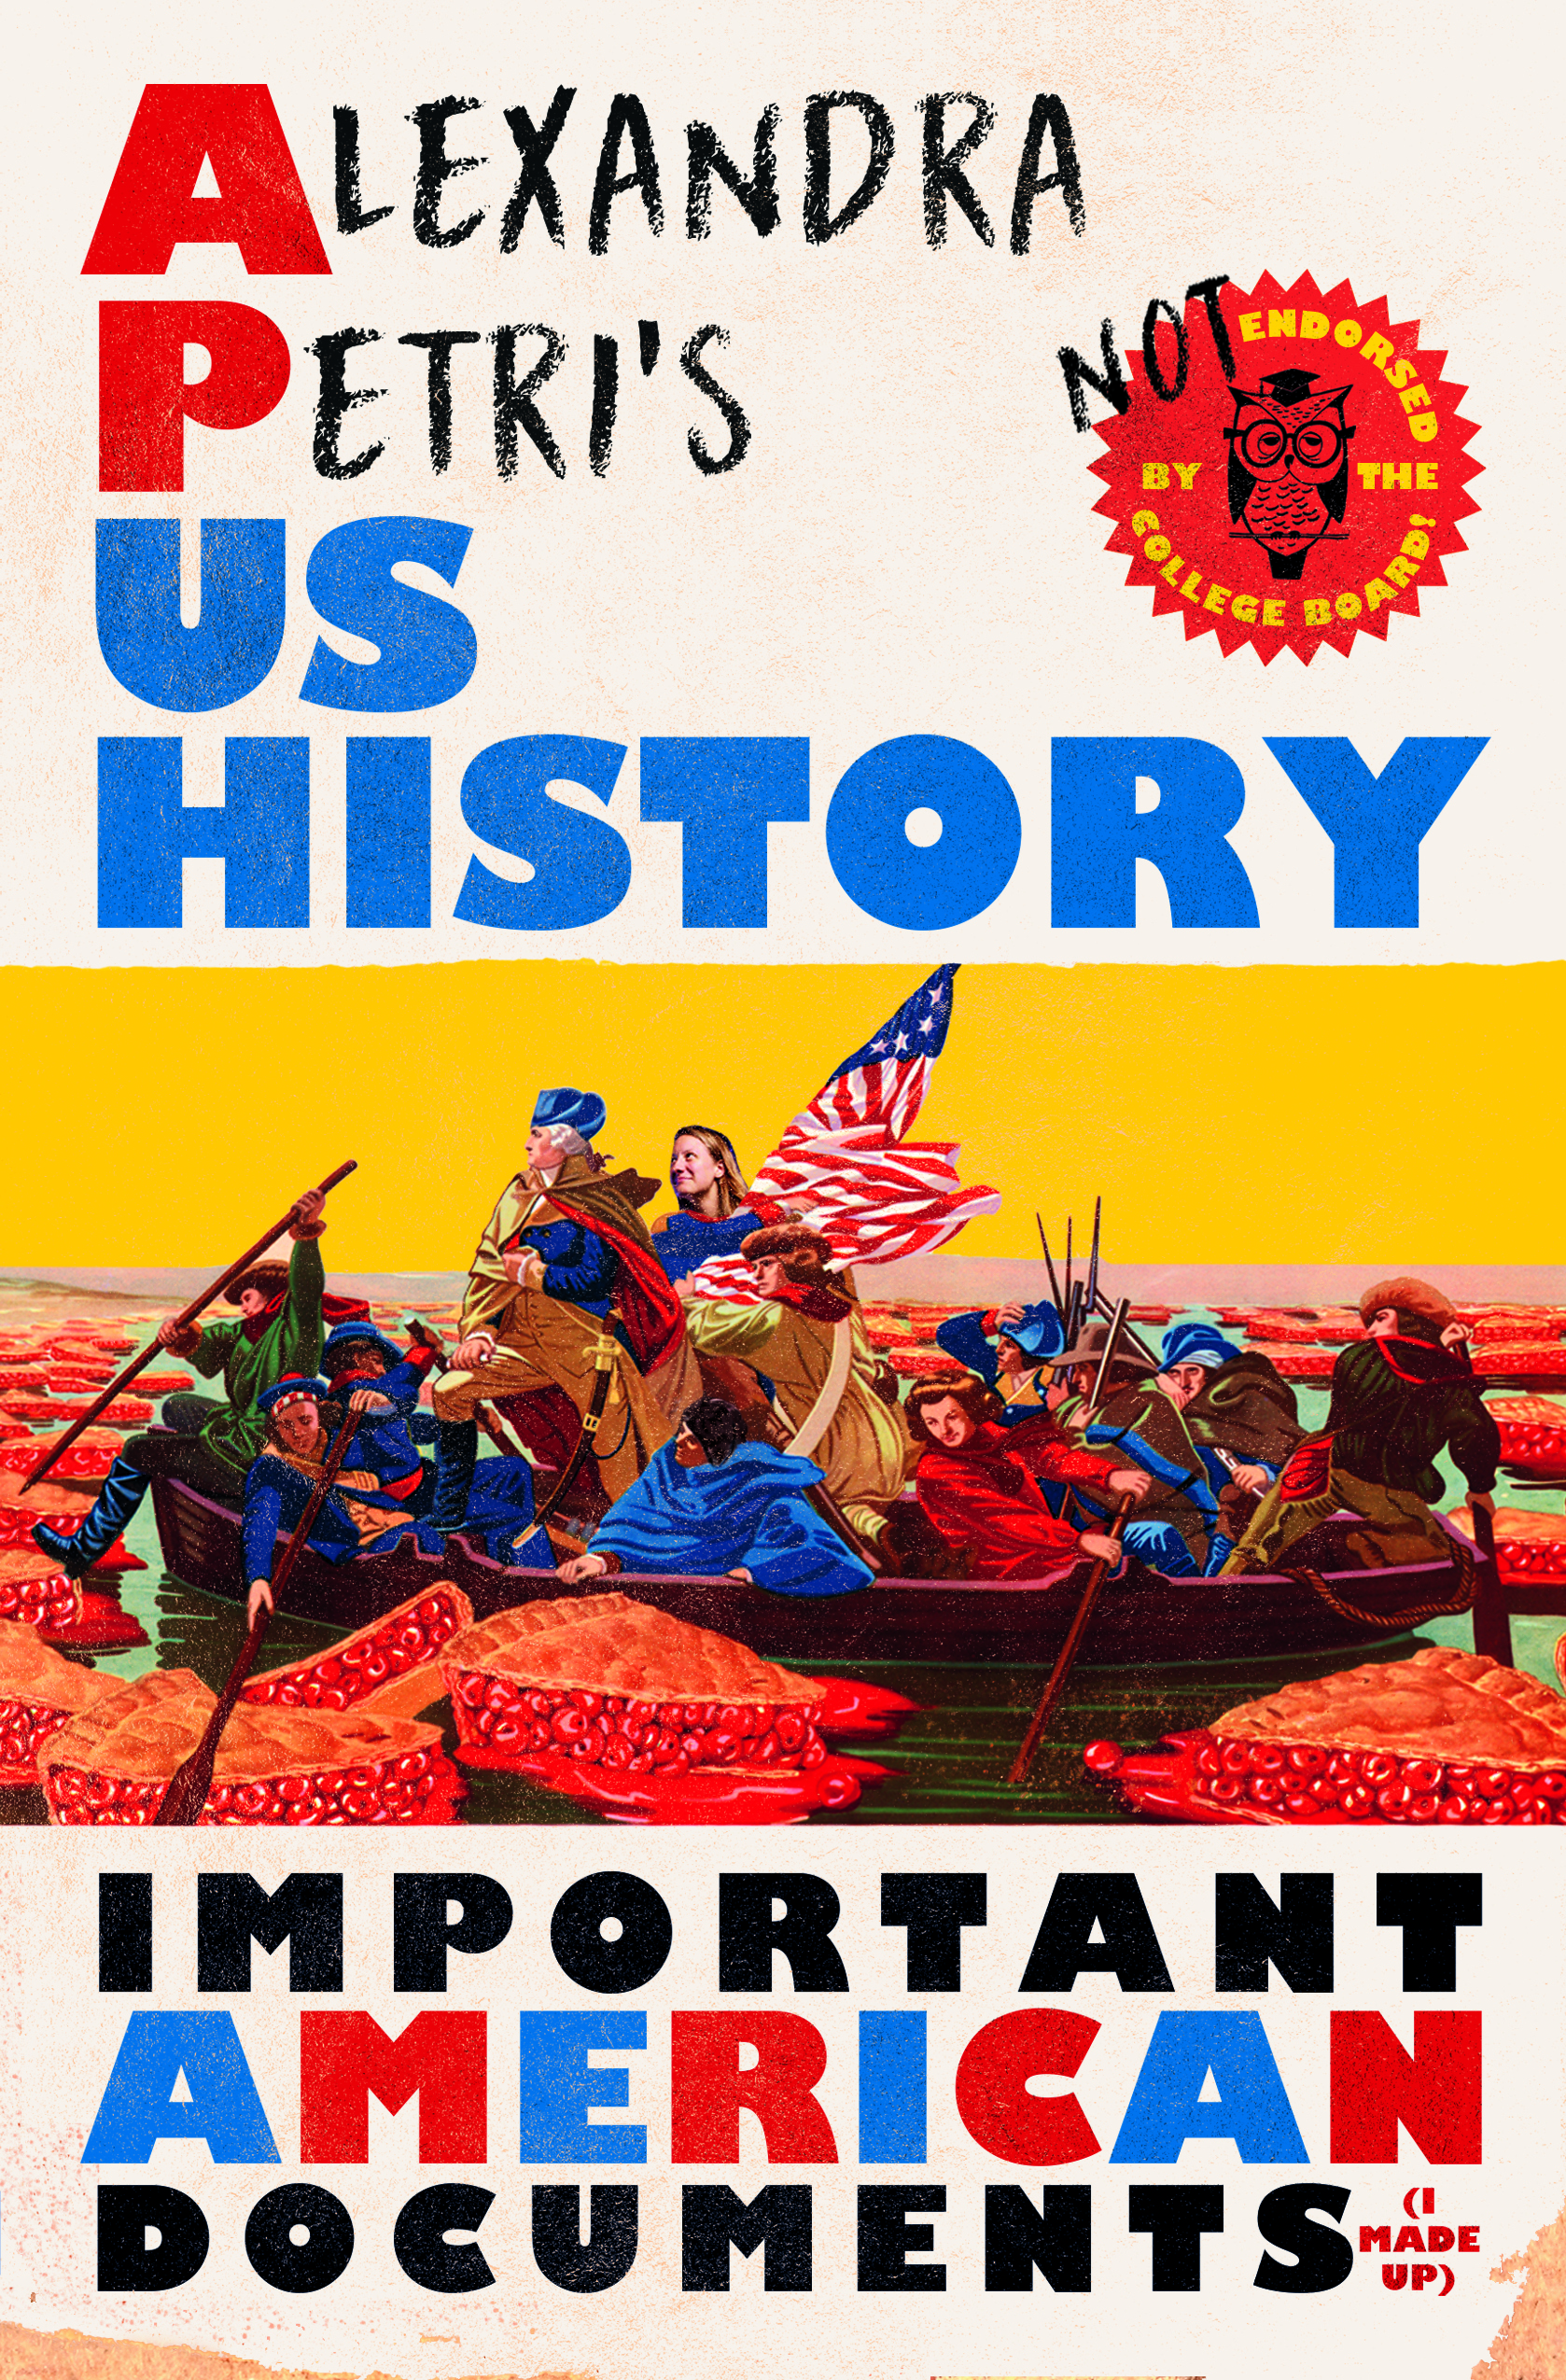 Book cover of Alexandra Petri’s US History: Important American Documents (I Made Up), illustrated by the painting of Emanuel Leutze’s Washington Crossing the Delaware with Alexandra Petri herself added to the boat, standing behind Washington. Around the boat, slices of cherry pie float in the water.
